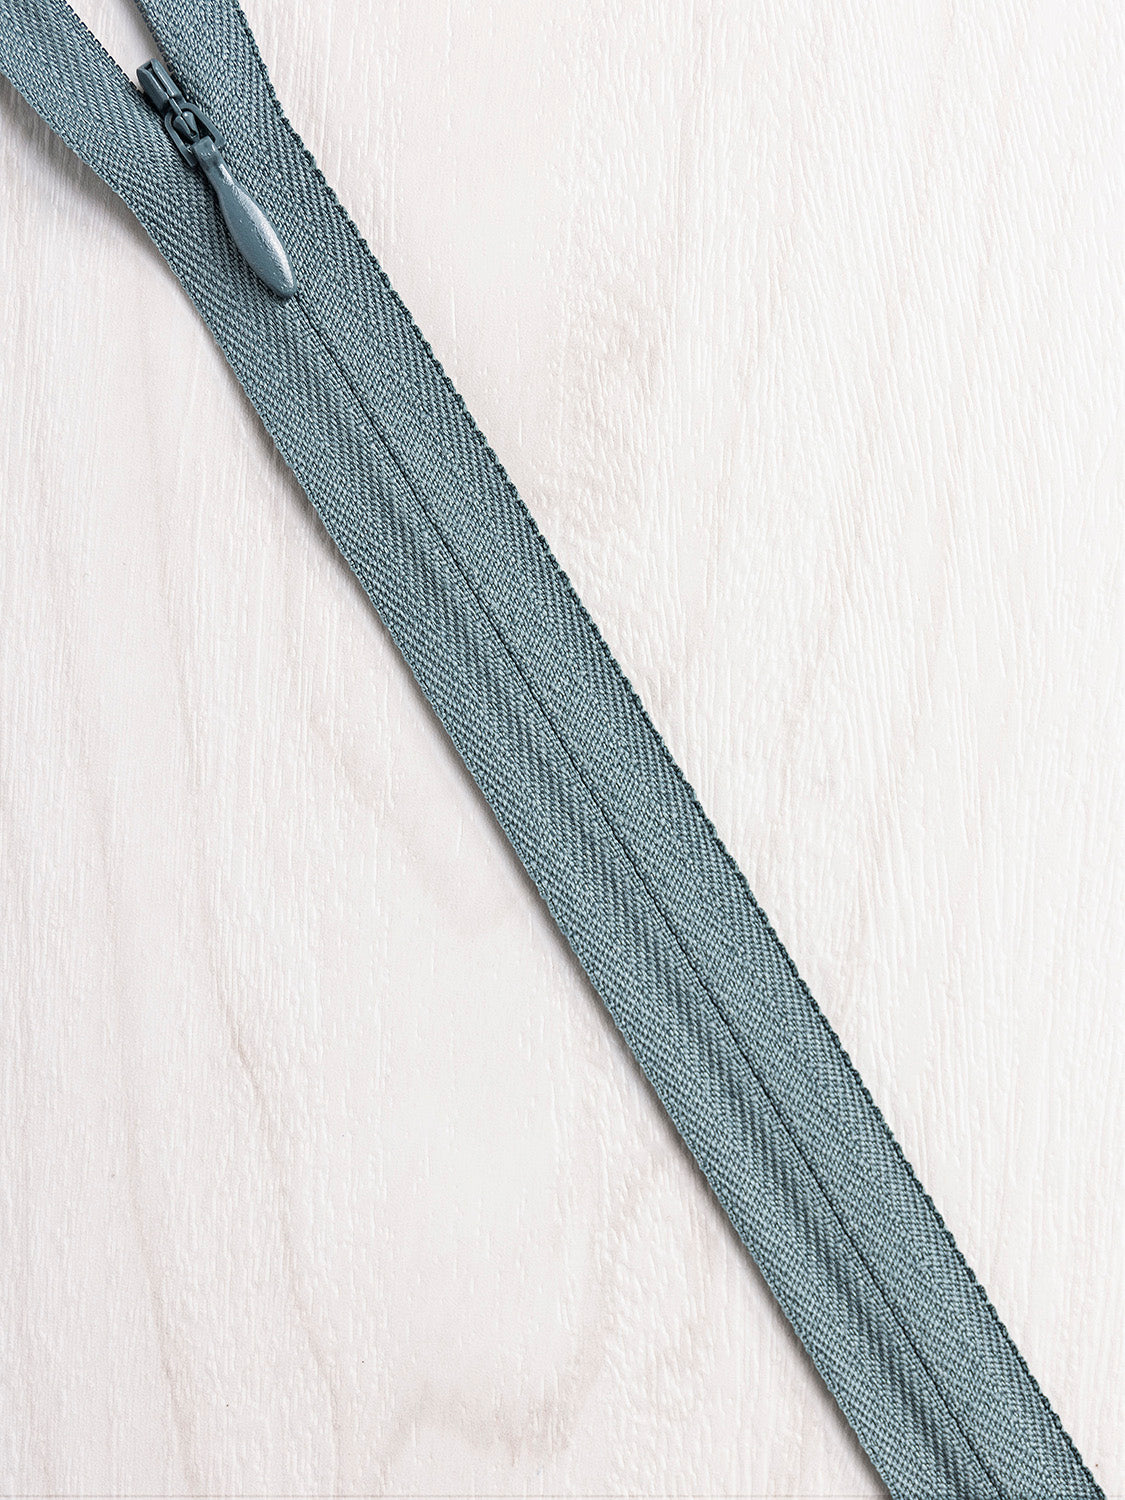 Invisible / Concealed Zippers - Teal Green 275